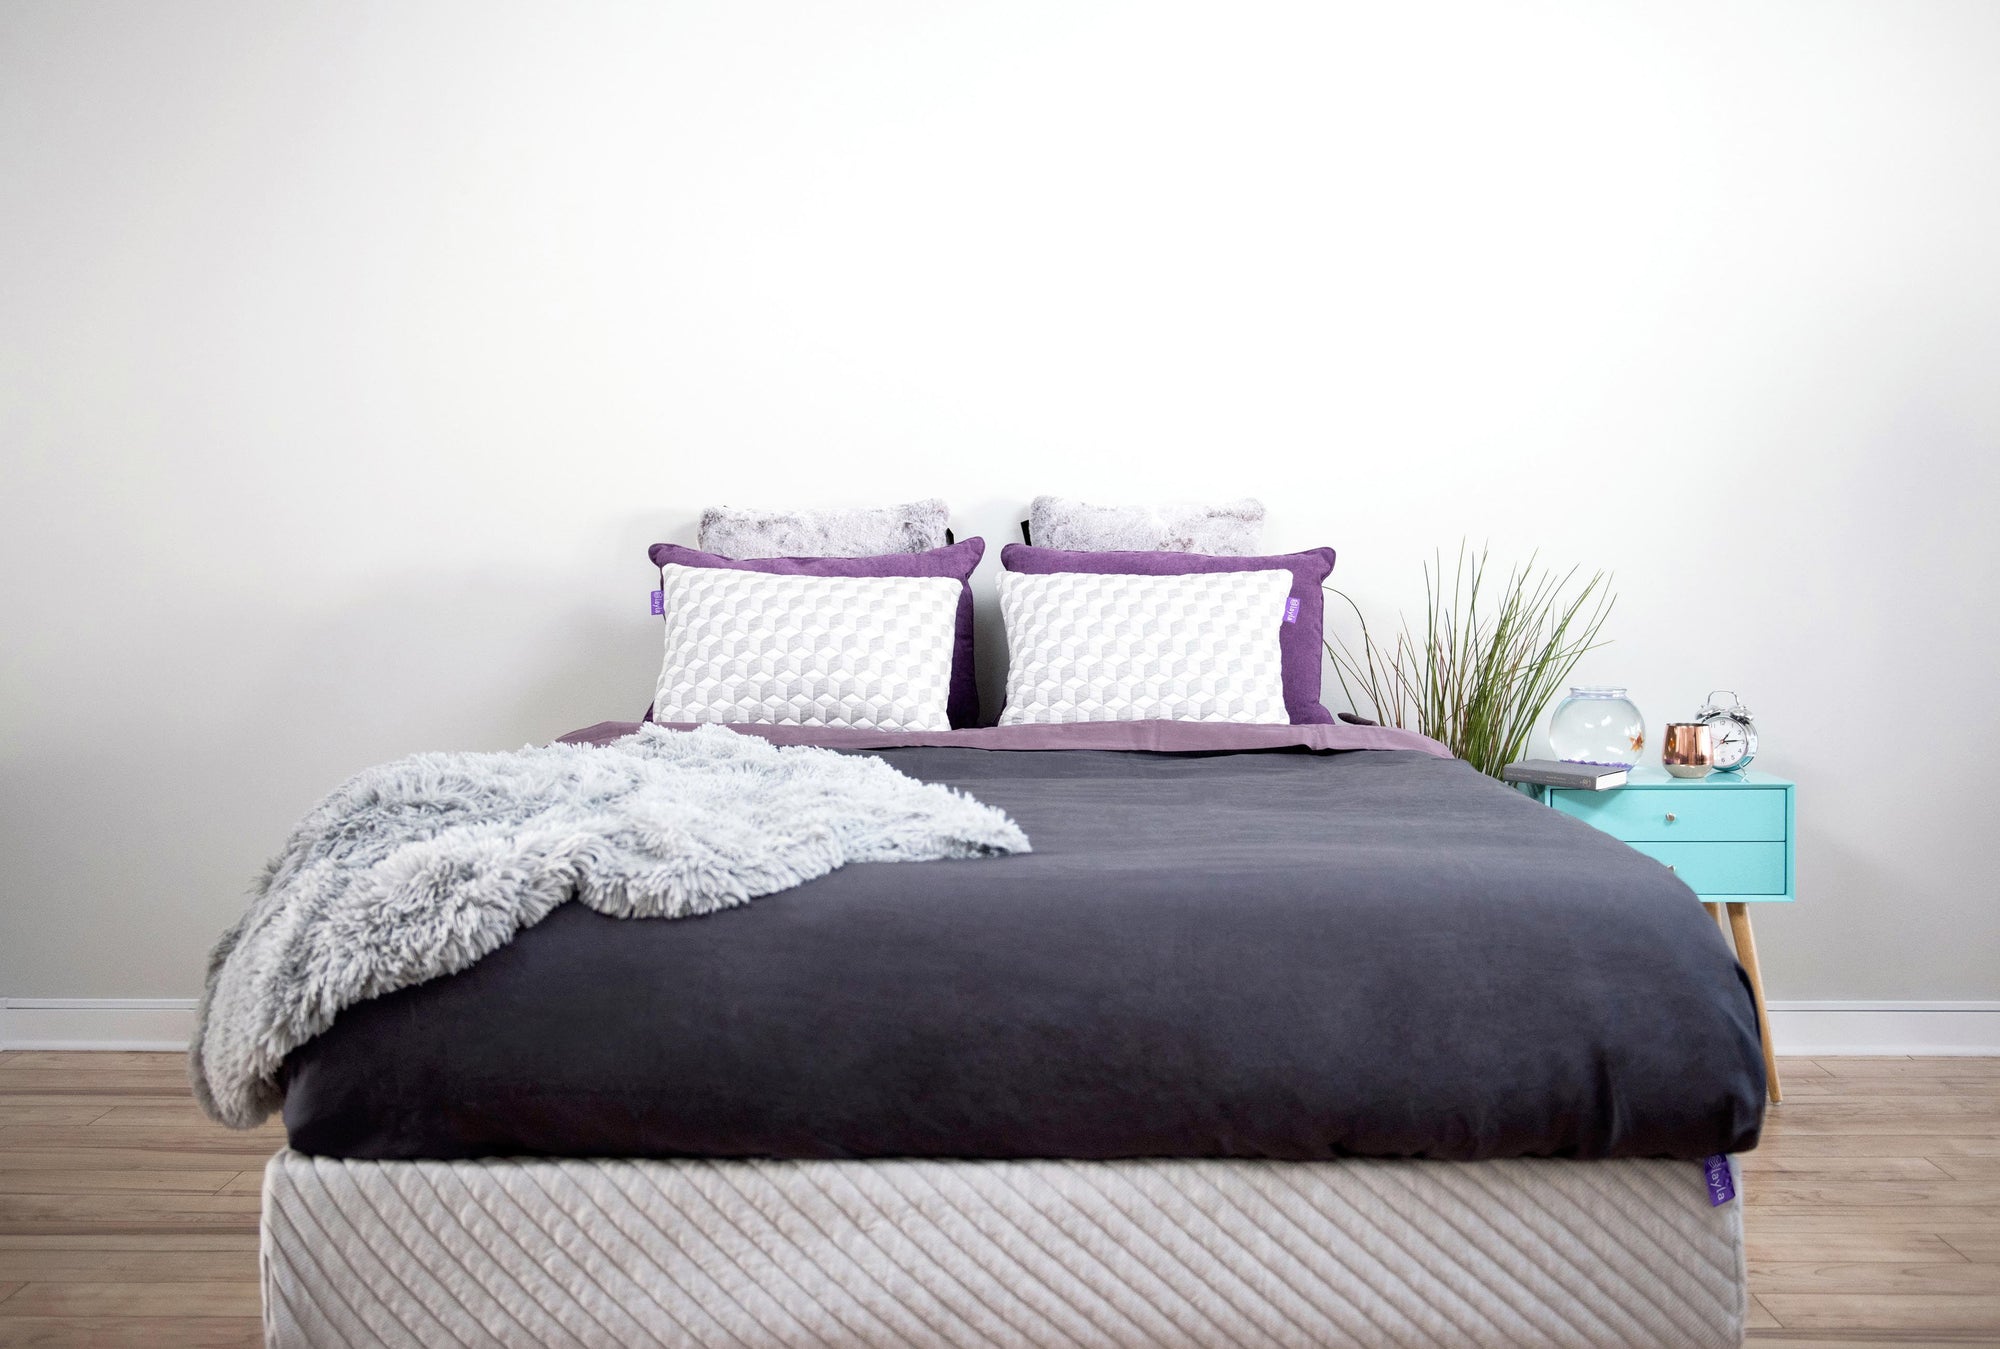 The Experts Have Spoken: This is the Mattress You’re Going to Want to Buy